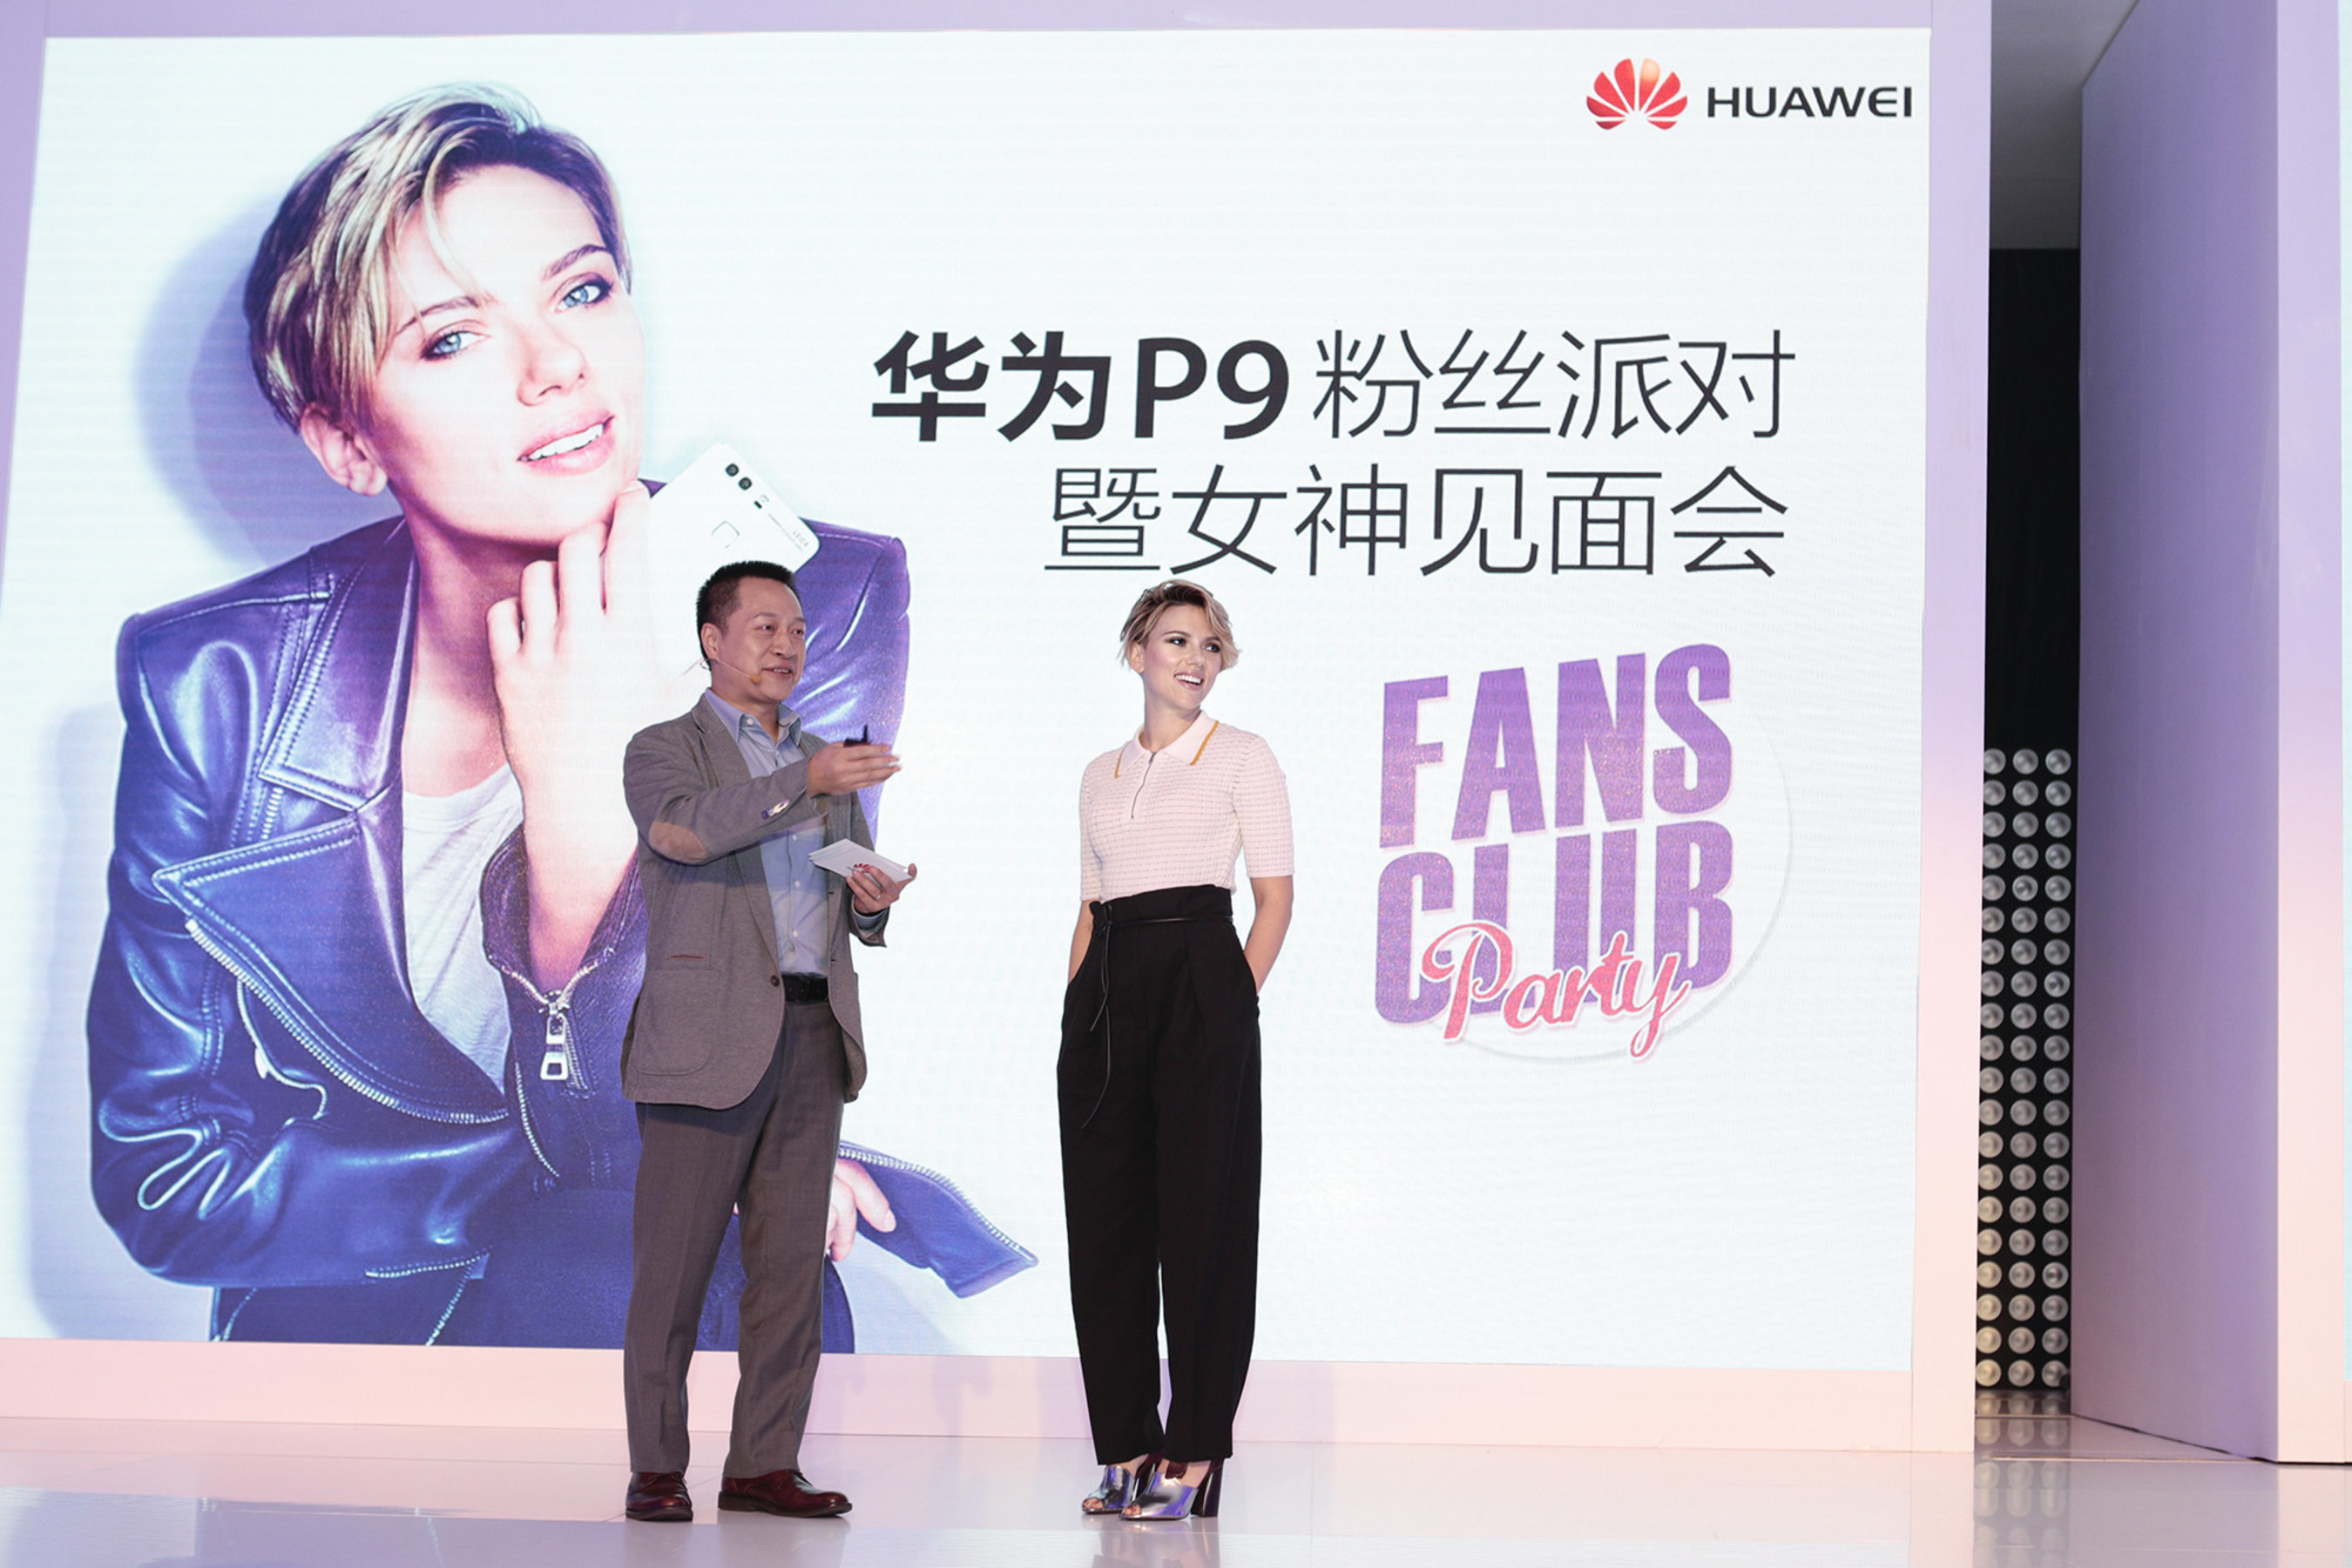 Scarlett Johansson attends Huawei P9 Fans Club Party event in Guangdong, China